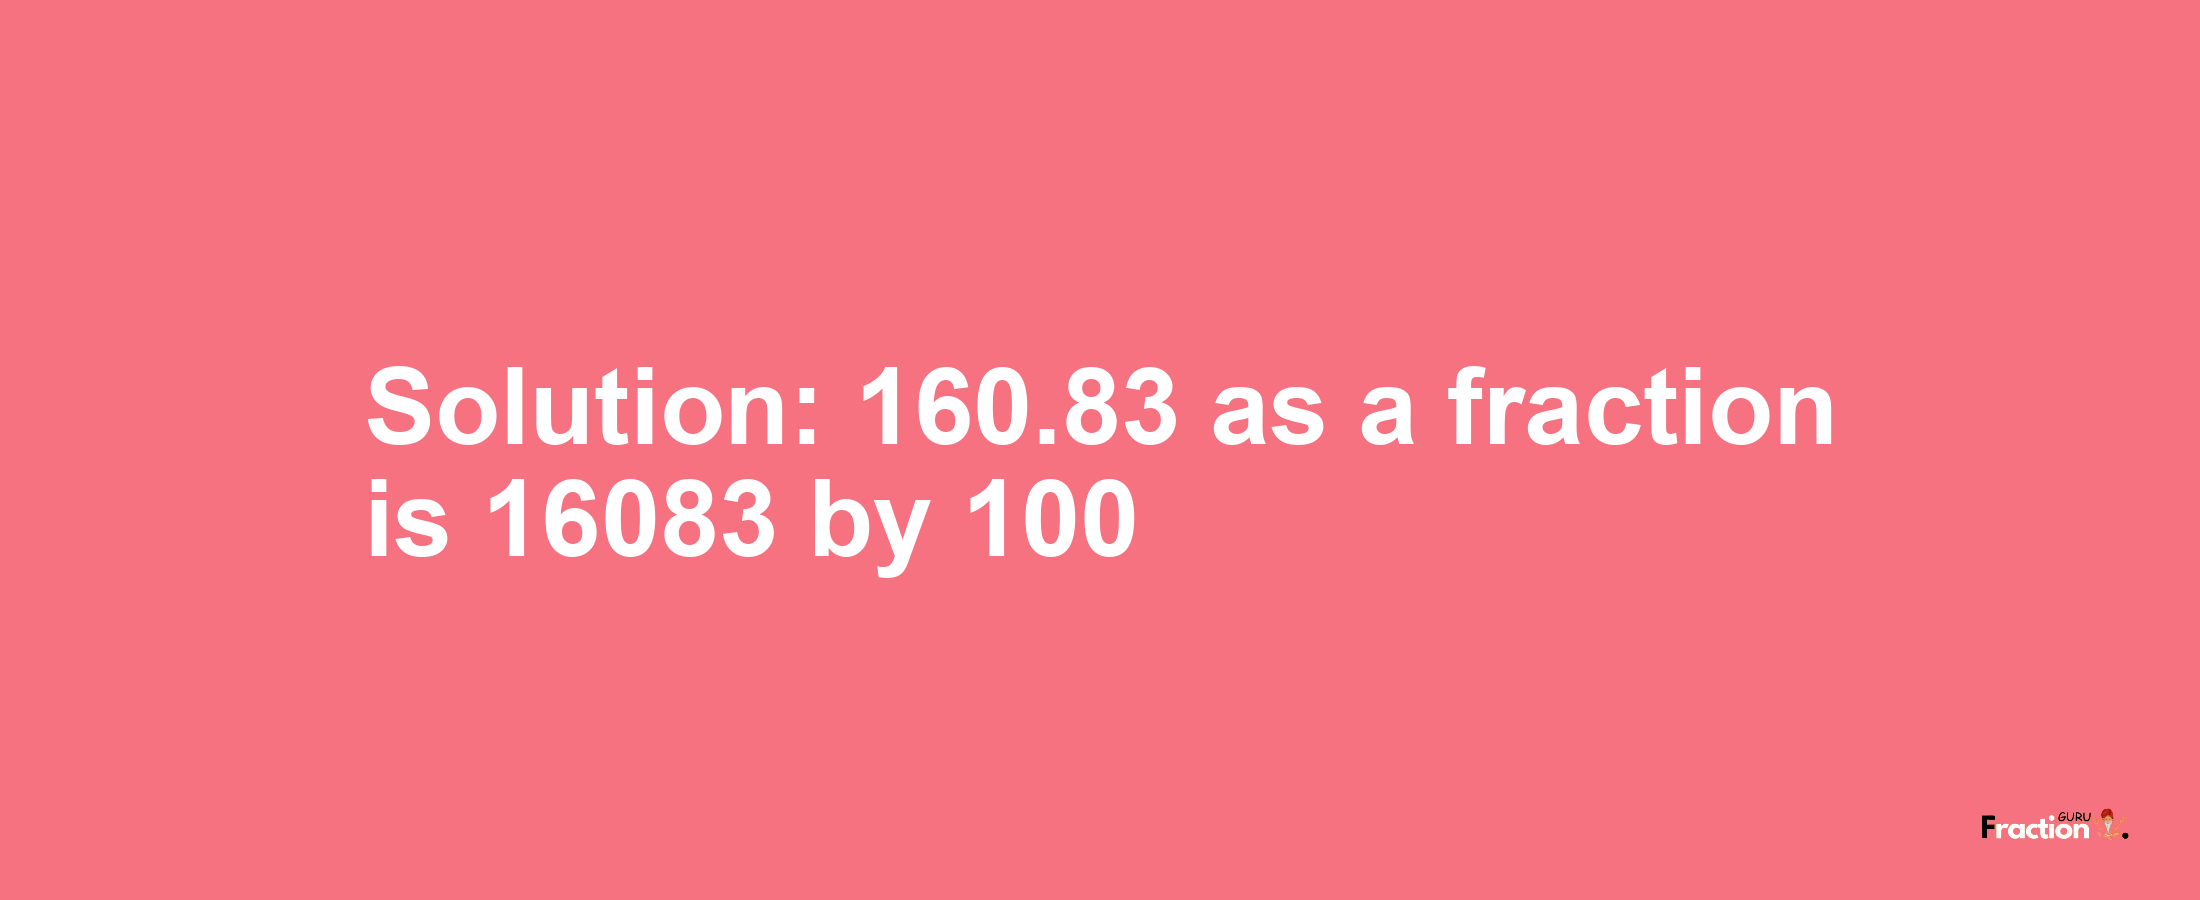 Solution:160.83 as a fraction is 16083/100